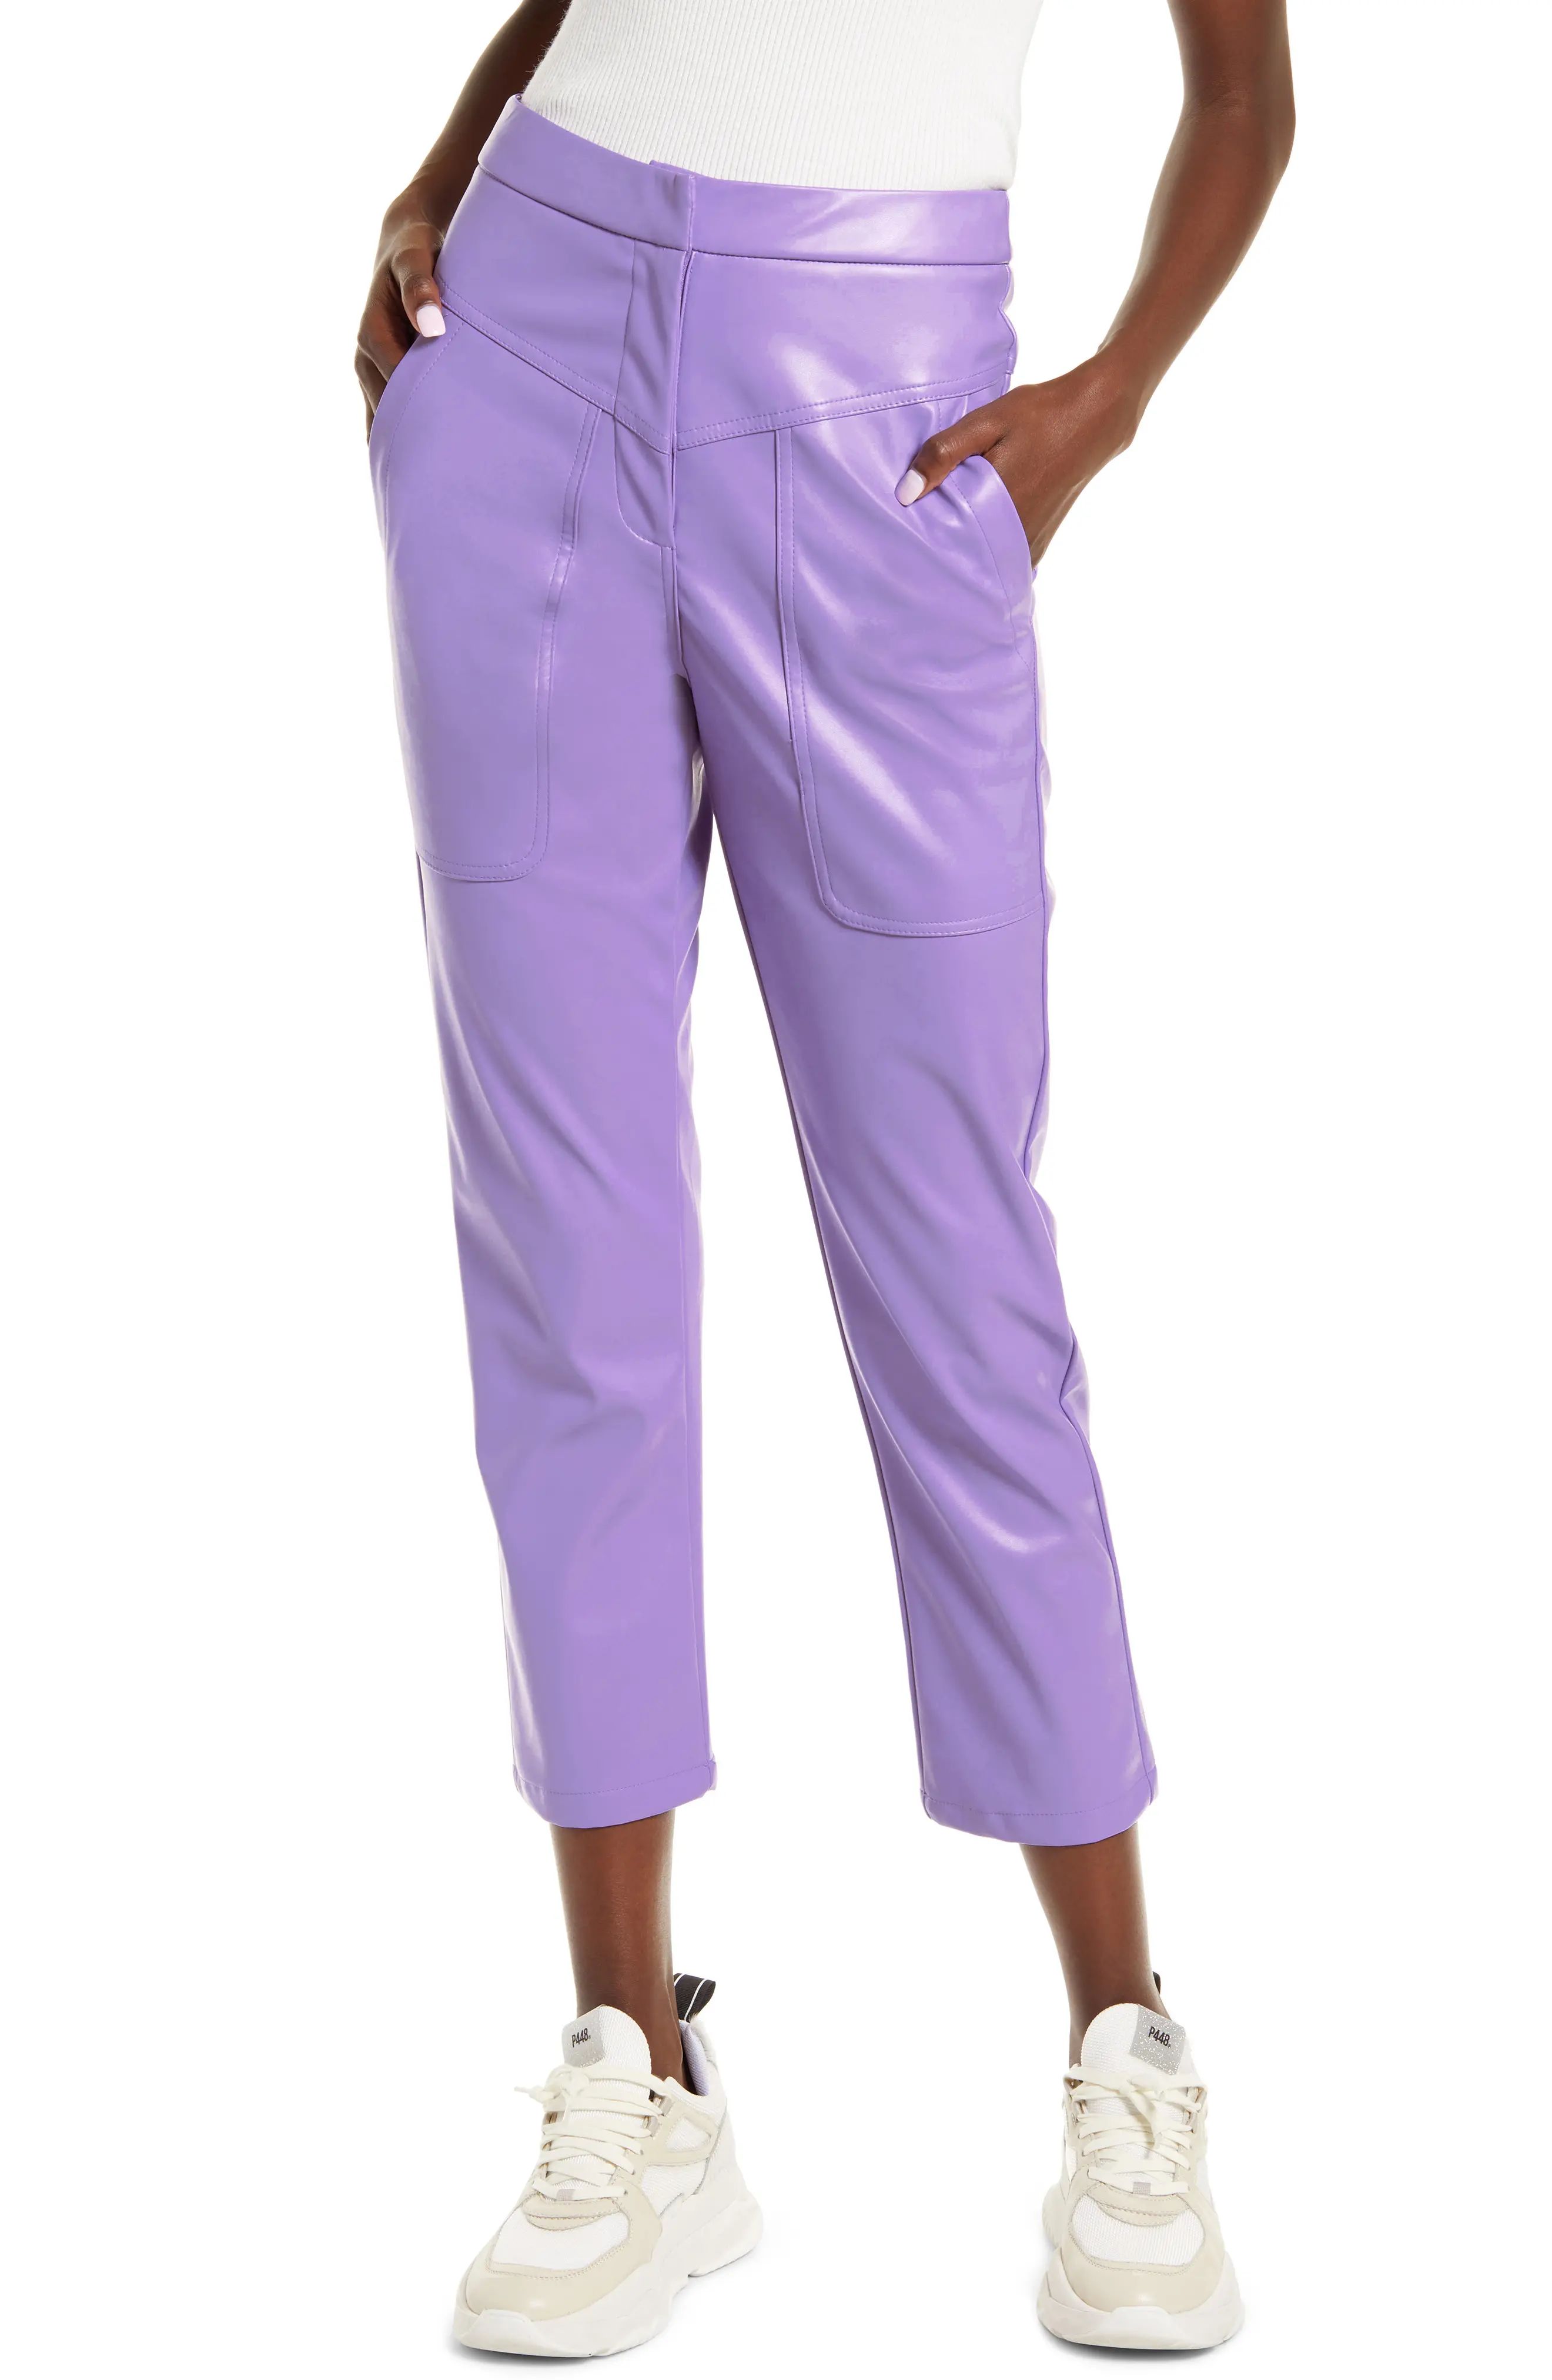 Amy Lynn Tapered Faux Leather Trousers in Purple at Nordstrom, Size Small | Nordstrom